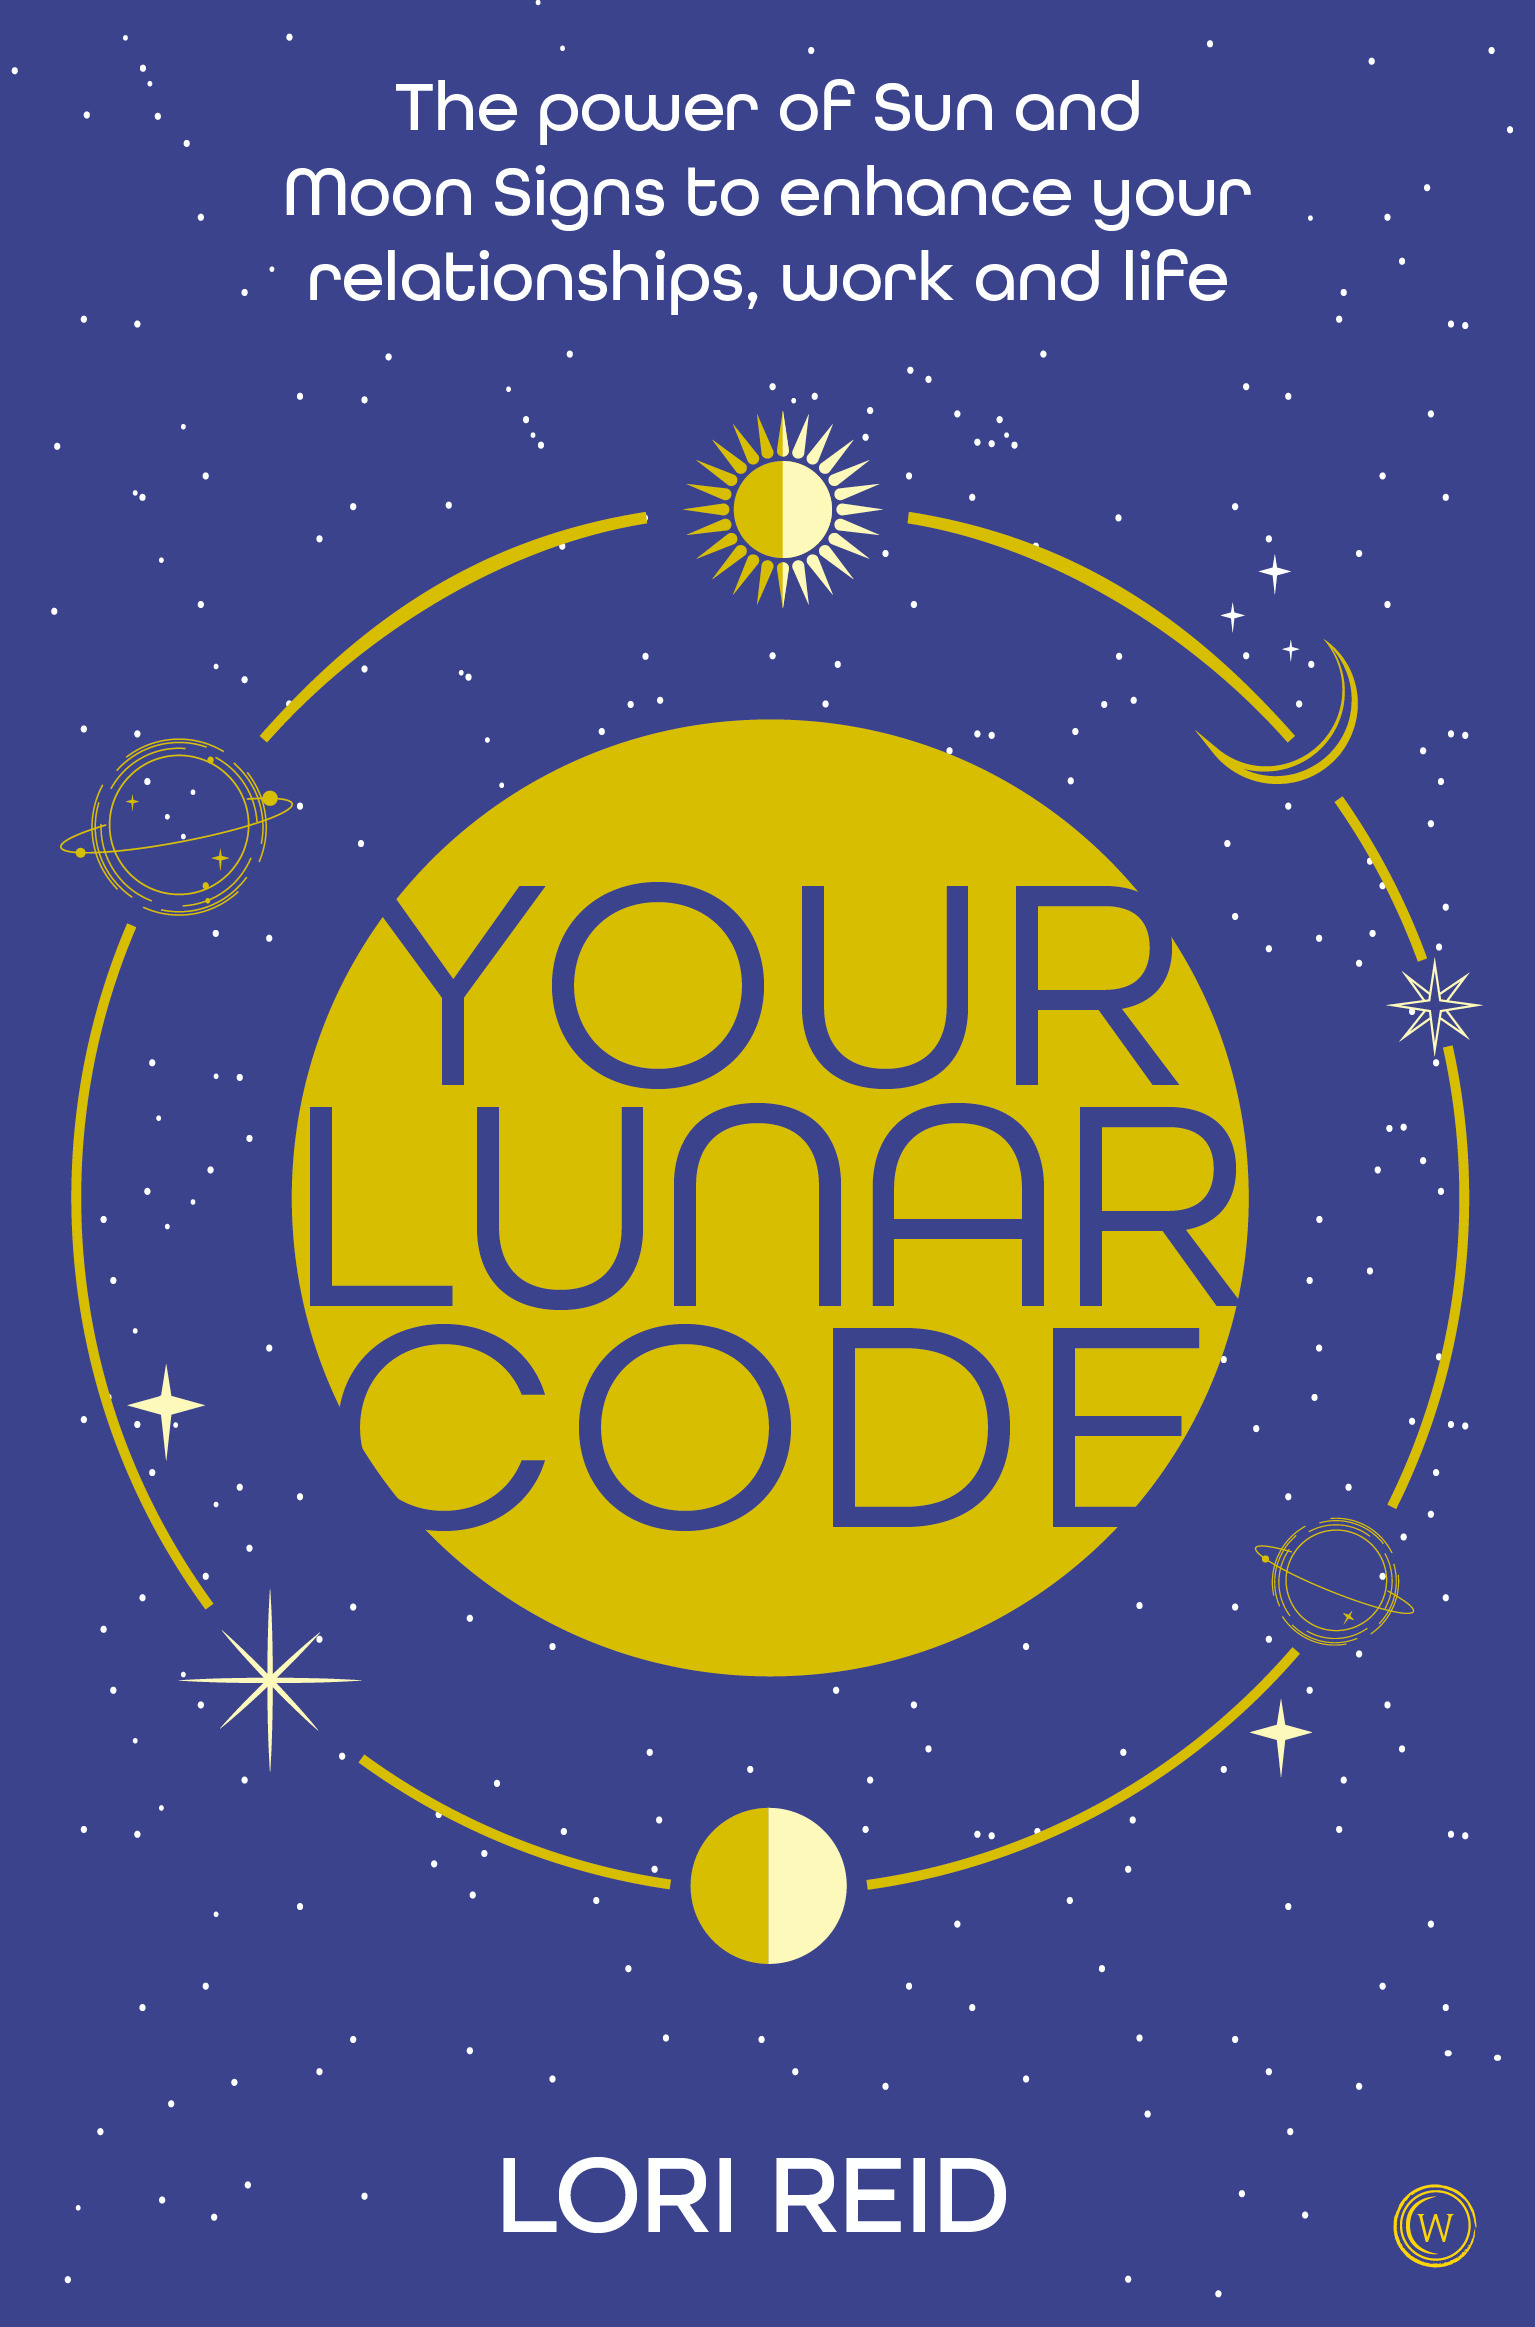 Your Lunar Code : The power of moon and sun signs to enhance your relationships, work and life | Faith & Spirituality